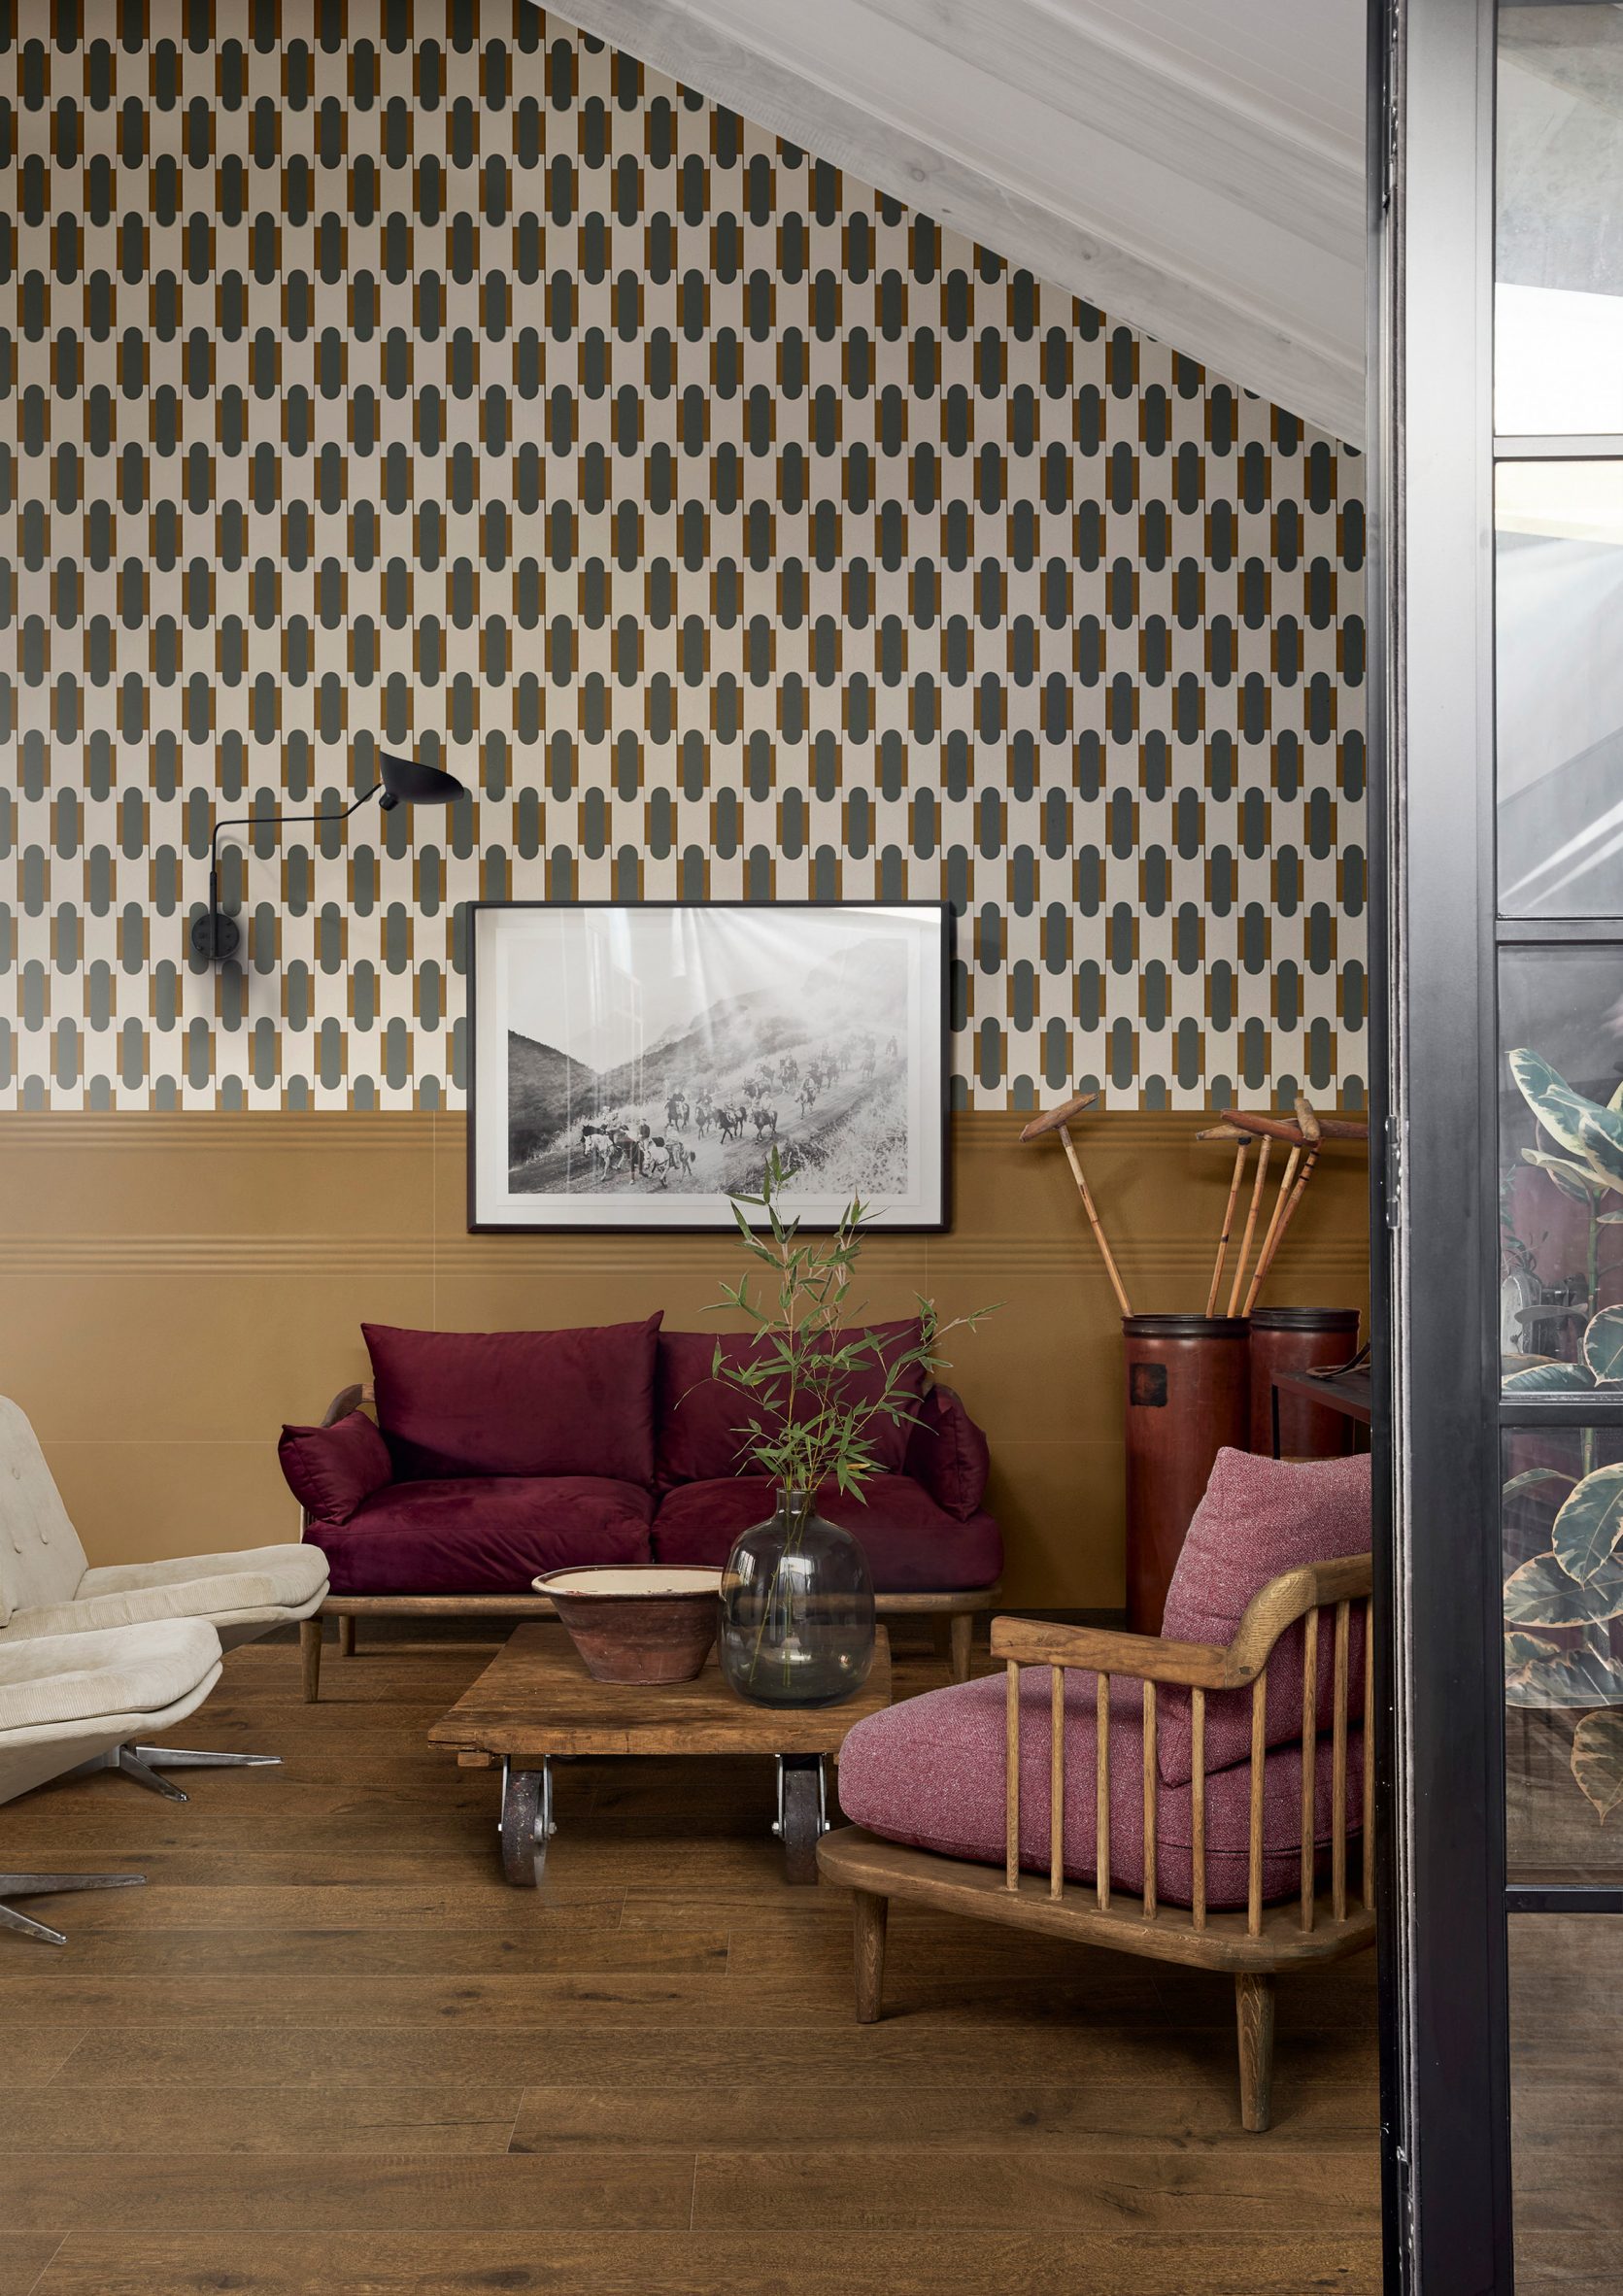 Photograph showing living space with geometric wallpaper